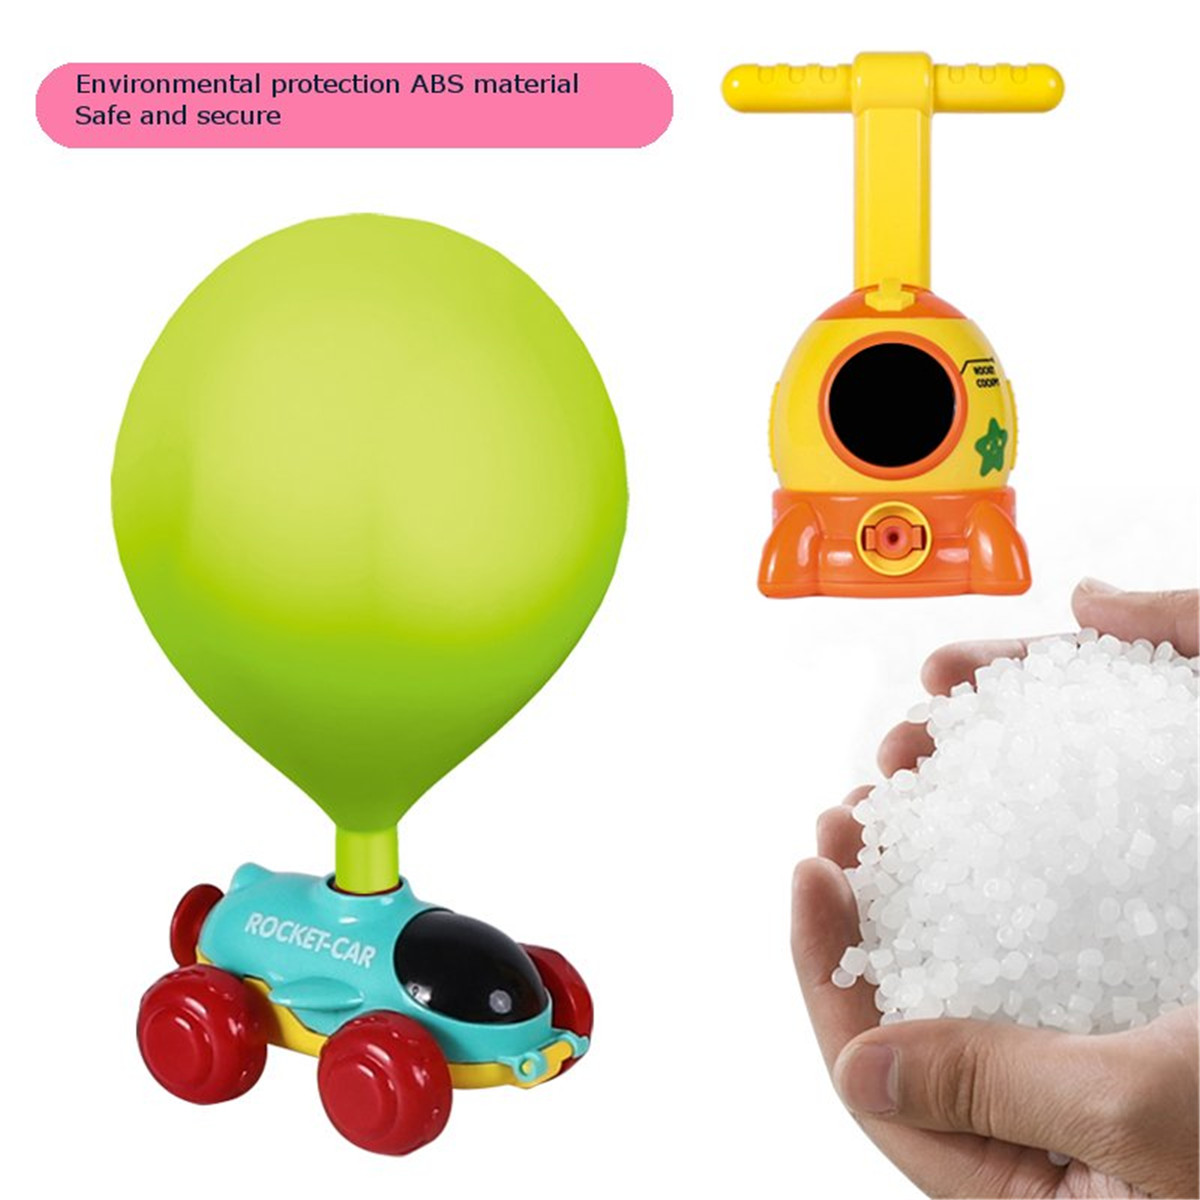 Inertial-Power-Balloon-Car-Intellectual-Development-Learning-Education-Science-Experiment-Toy-for-Ki-1698287-6